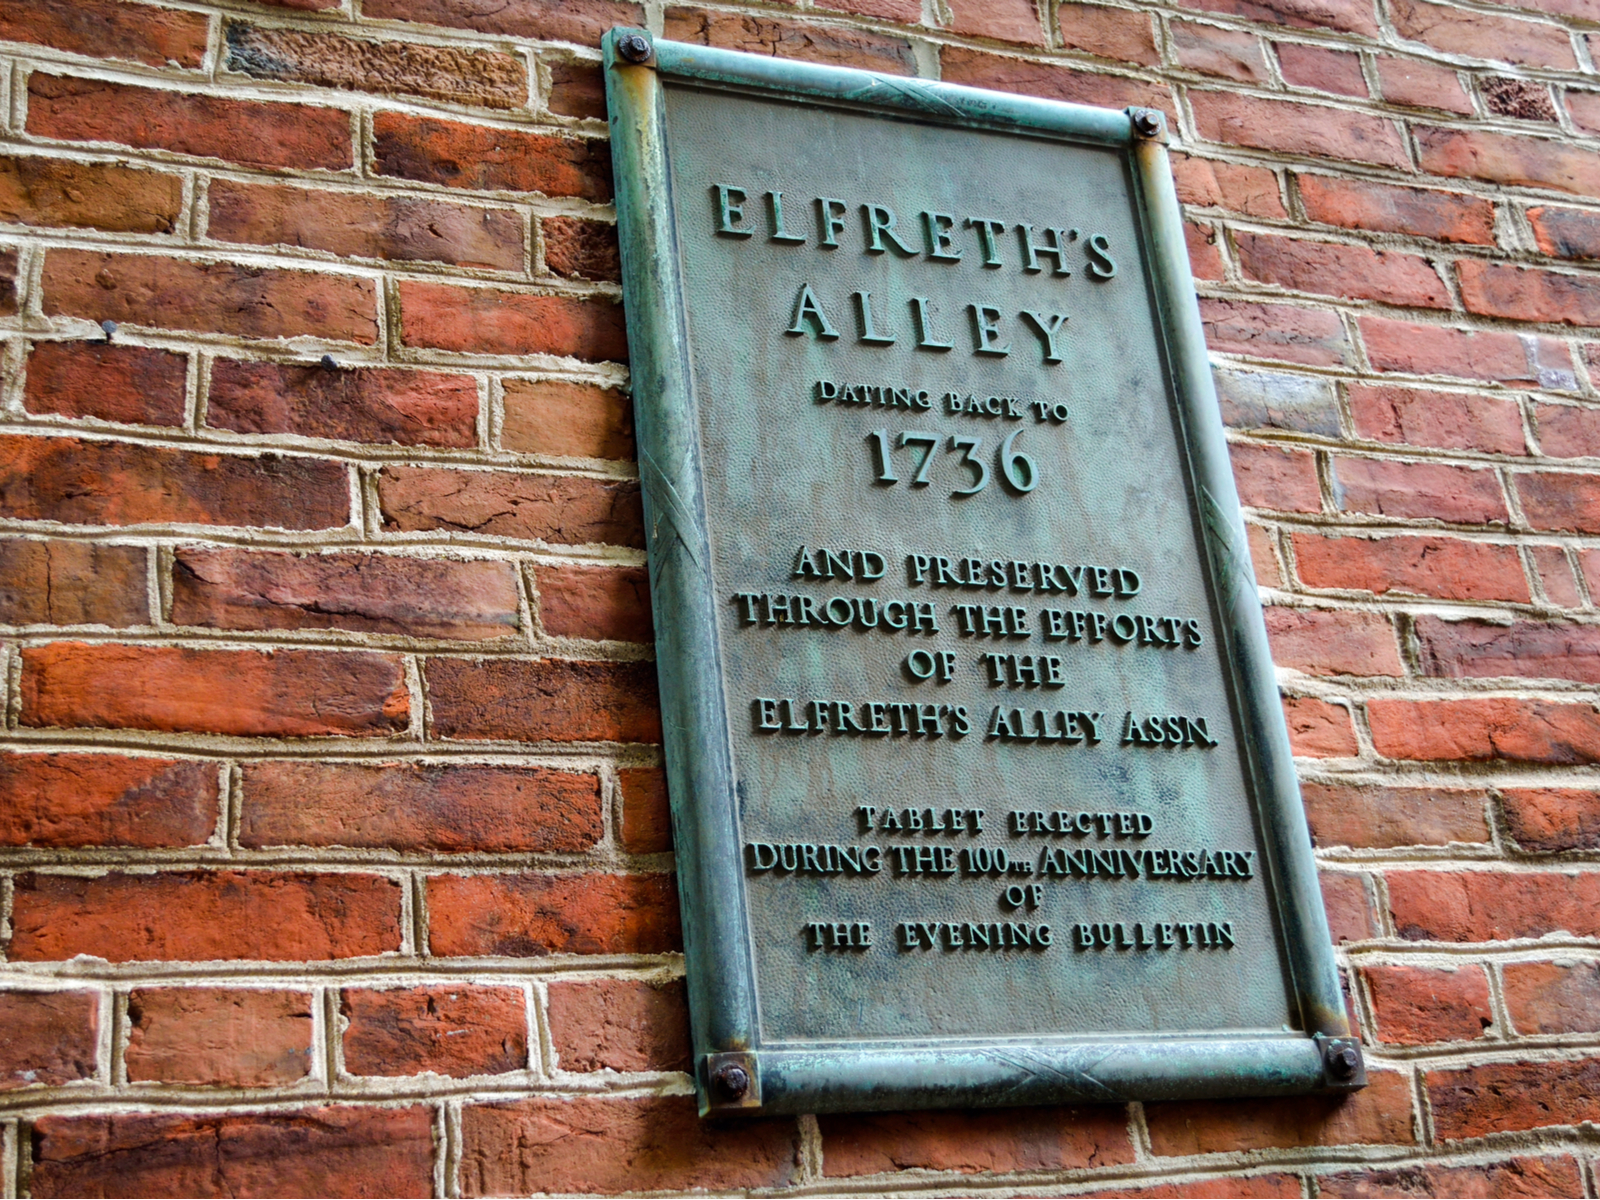 Elfreth's Alley Museum, one of the best things to do in Philadelphia, as viewed from the outside